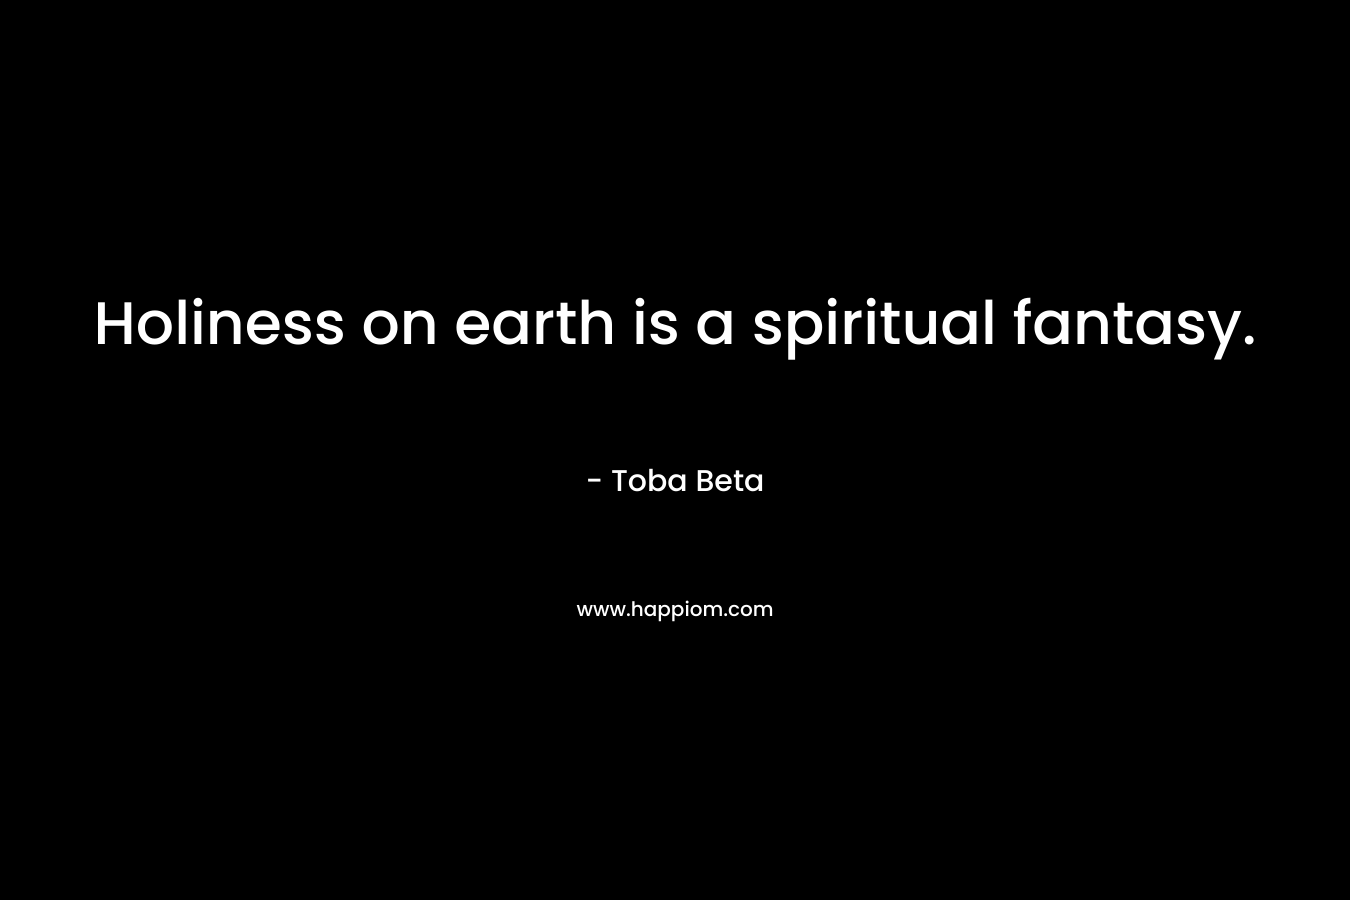 Holiness on earth is a spiritual fantasy. – Toba Beta